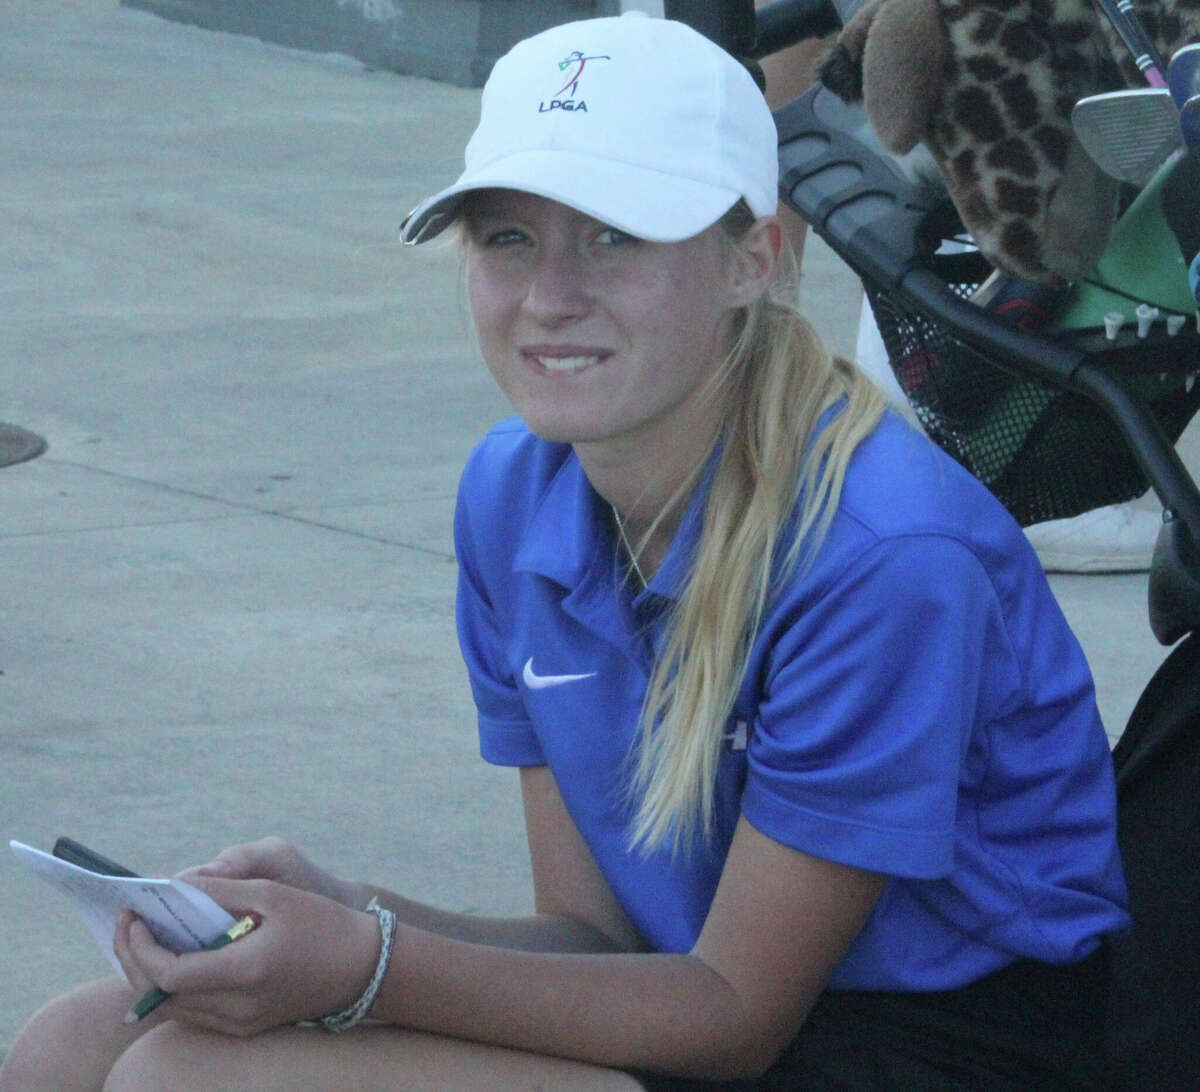 Madison Allen was the regional golf champion and her team has qualified for the state finals.